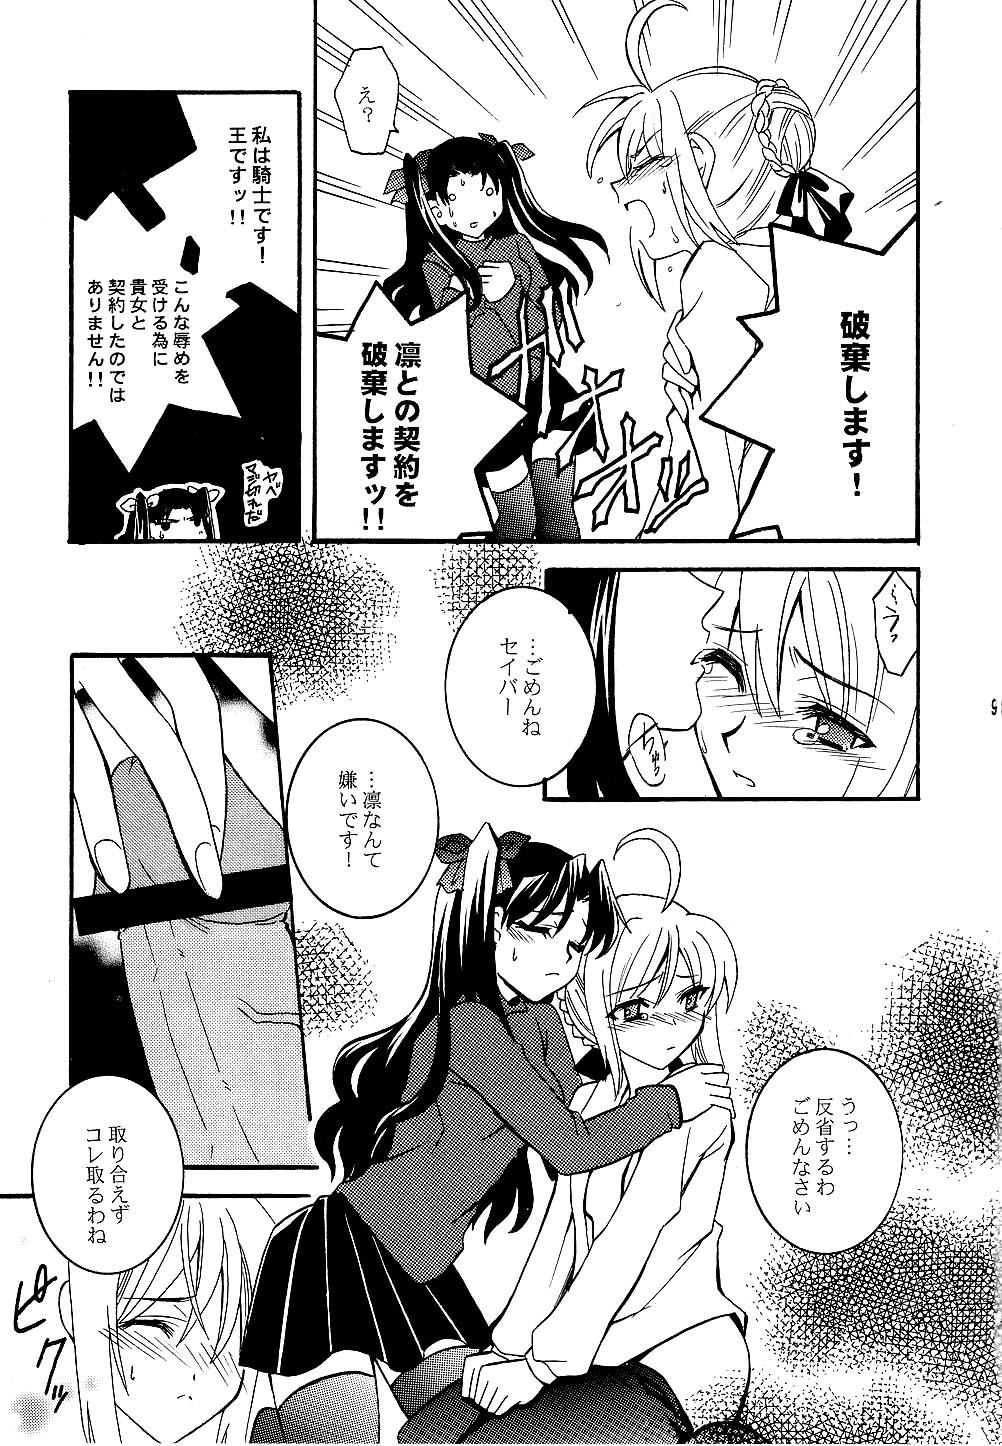 Young Tits KING KILL 33 - Fate stay night Vintage - Page 8